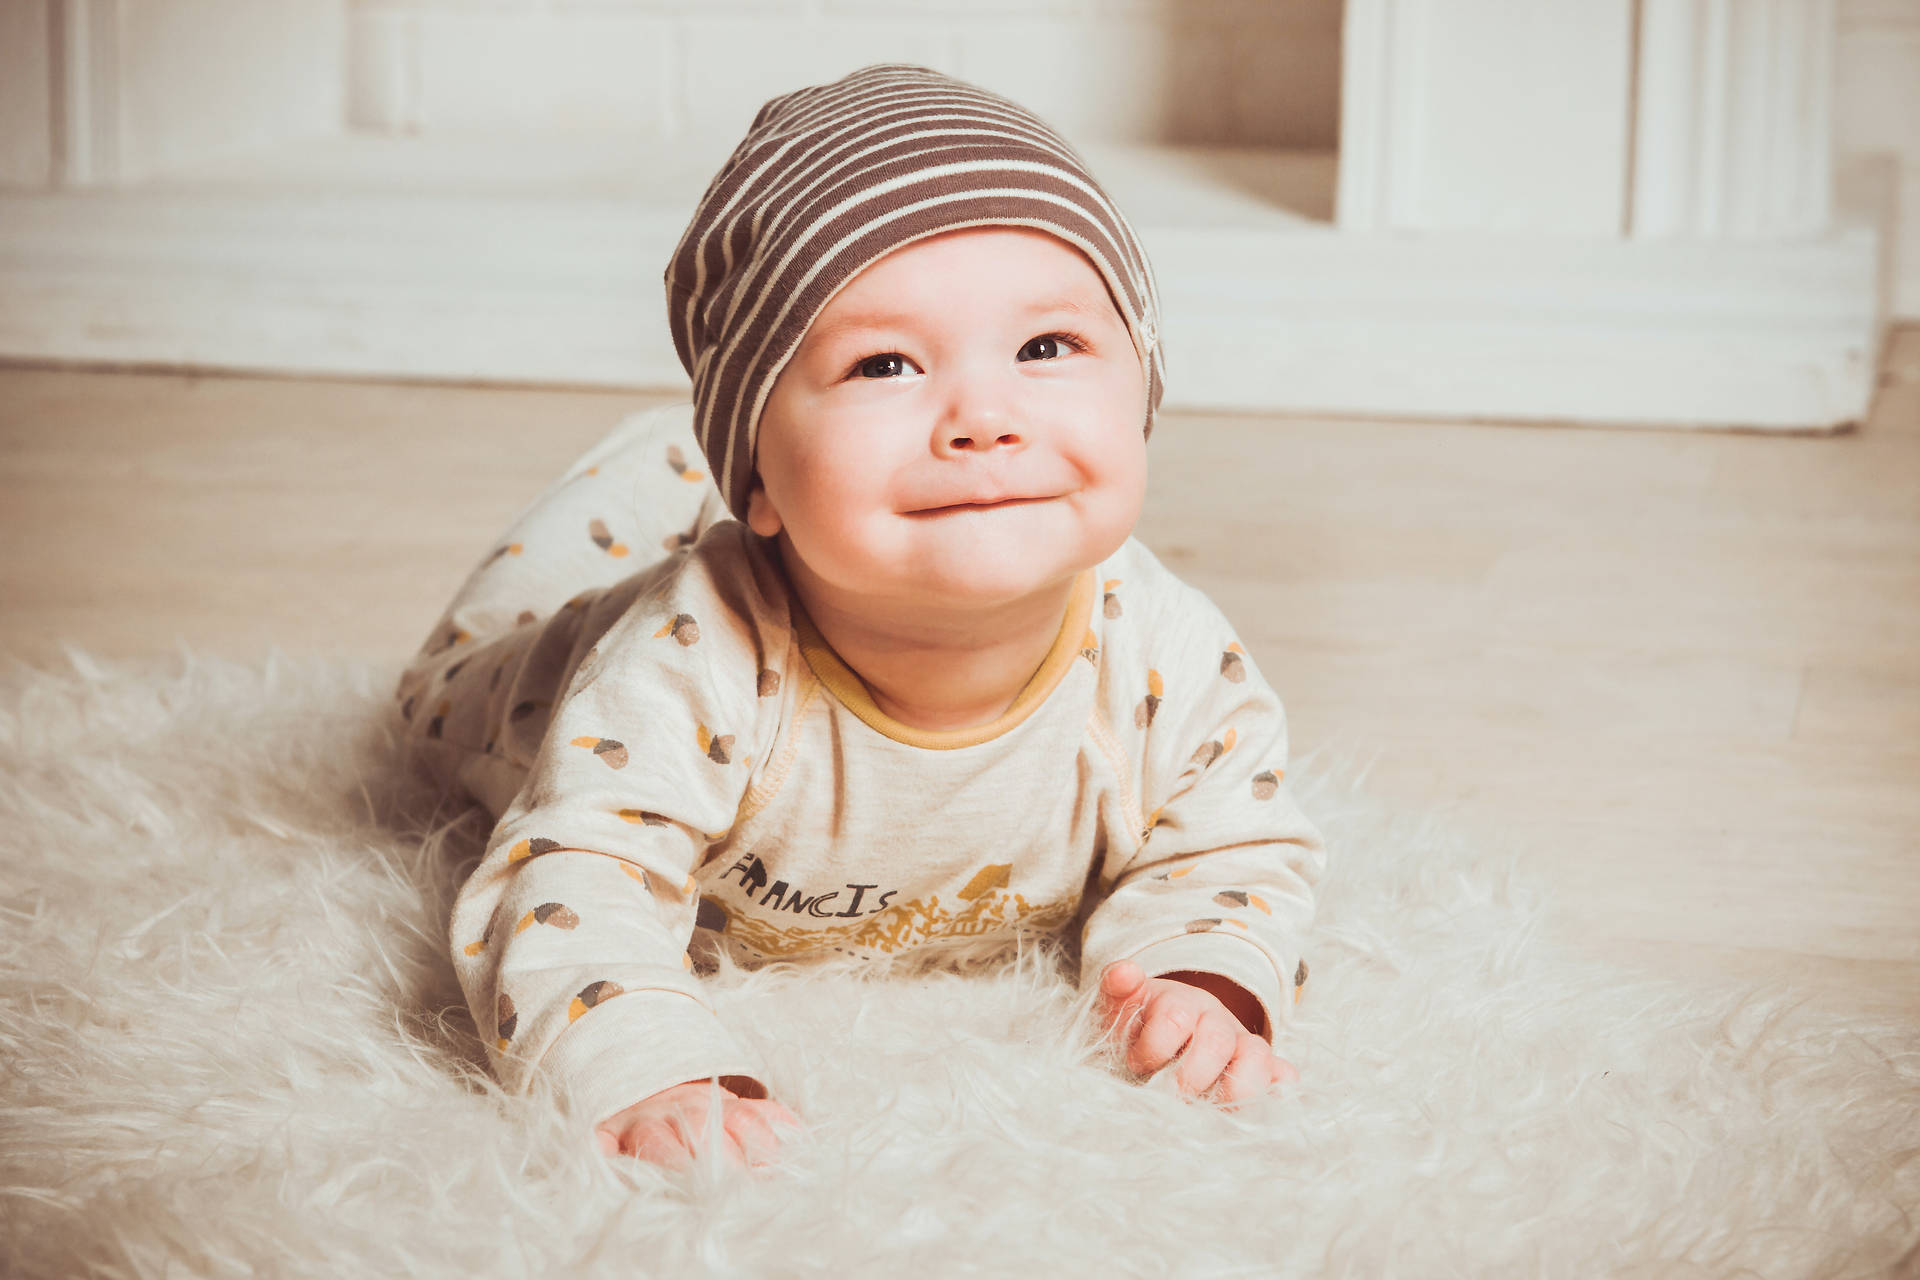 Adorable Baby With A Mischievous Smile